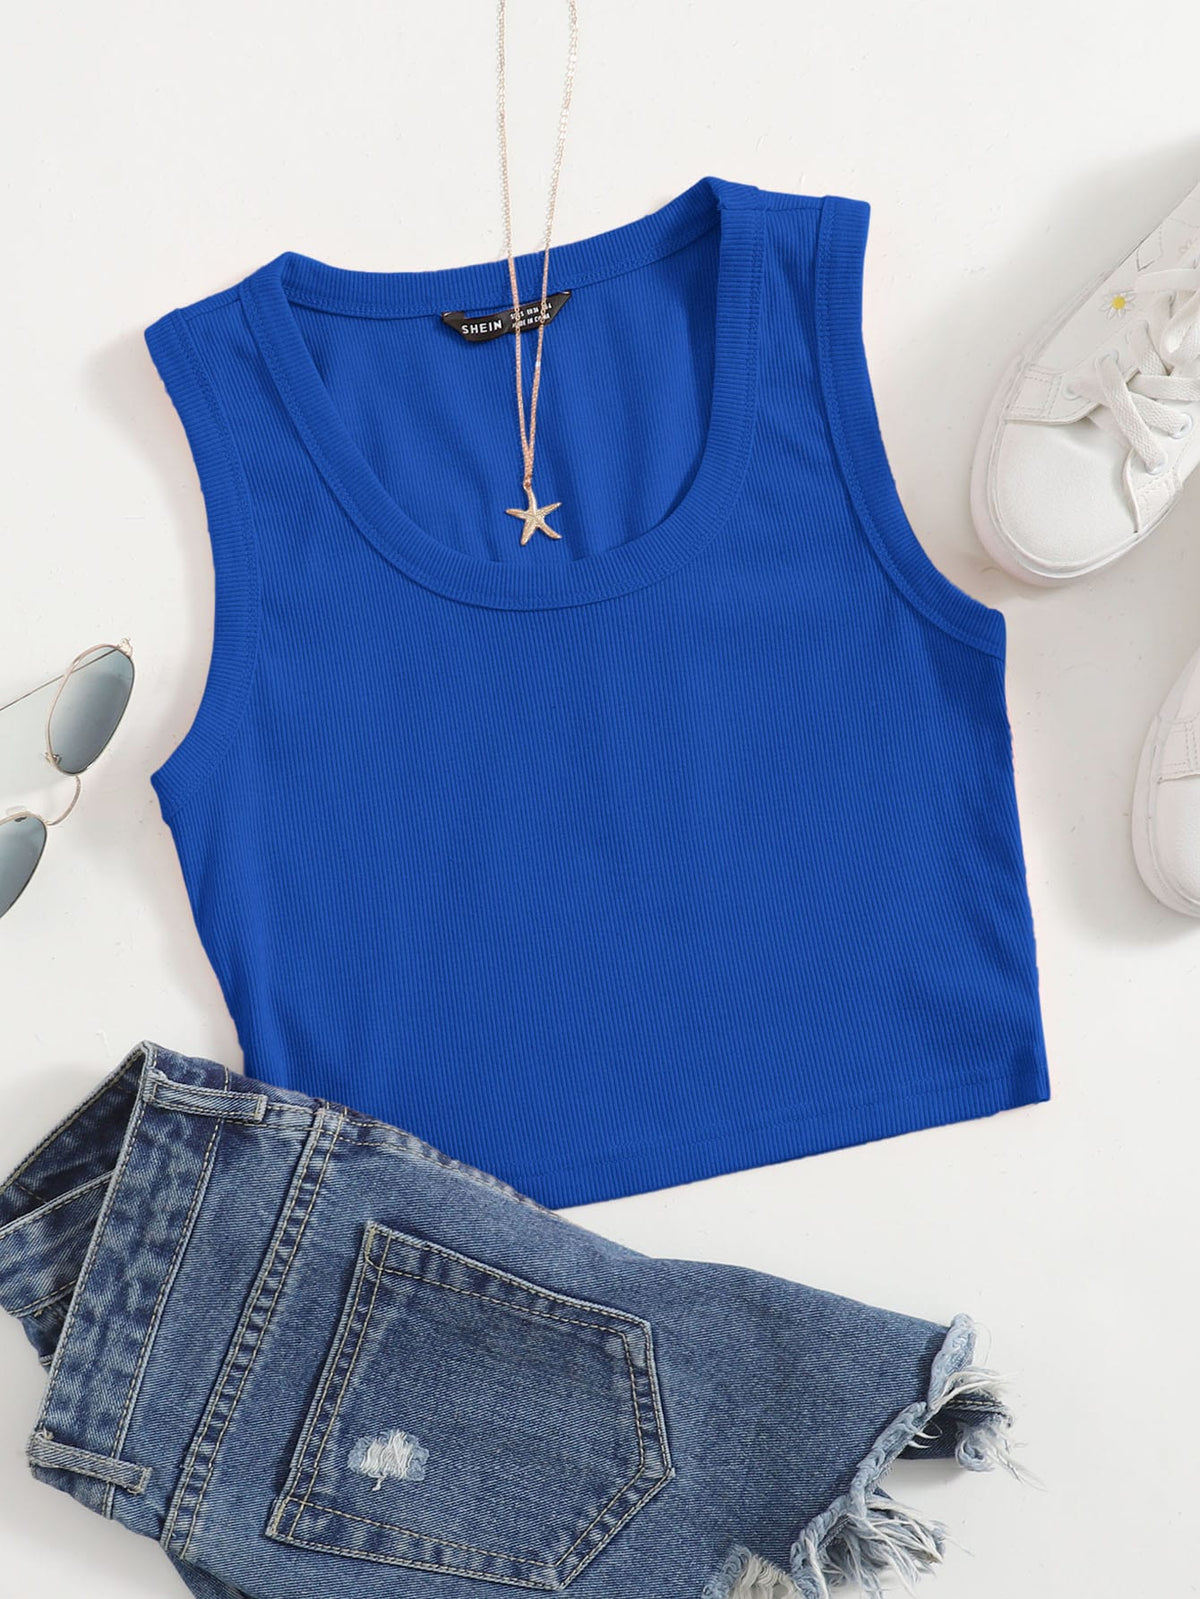 SHEIN Solid Fitted Tank Top  Blue tank top outfit, Best tank tops, Top  summer outfits